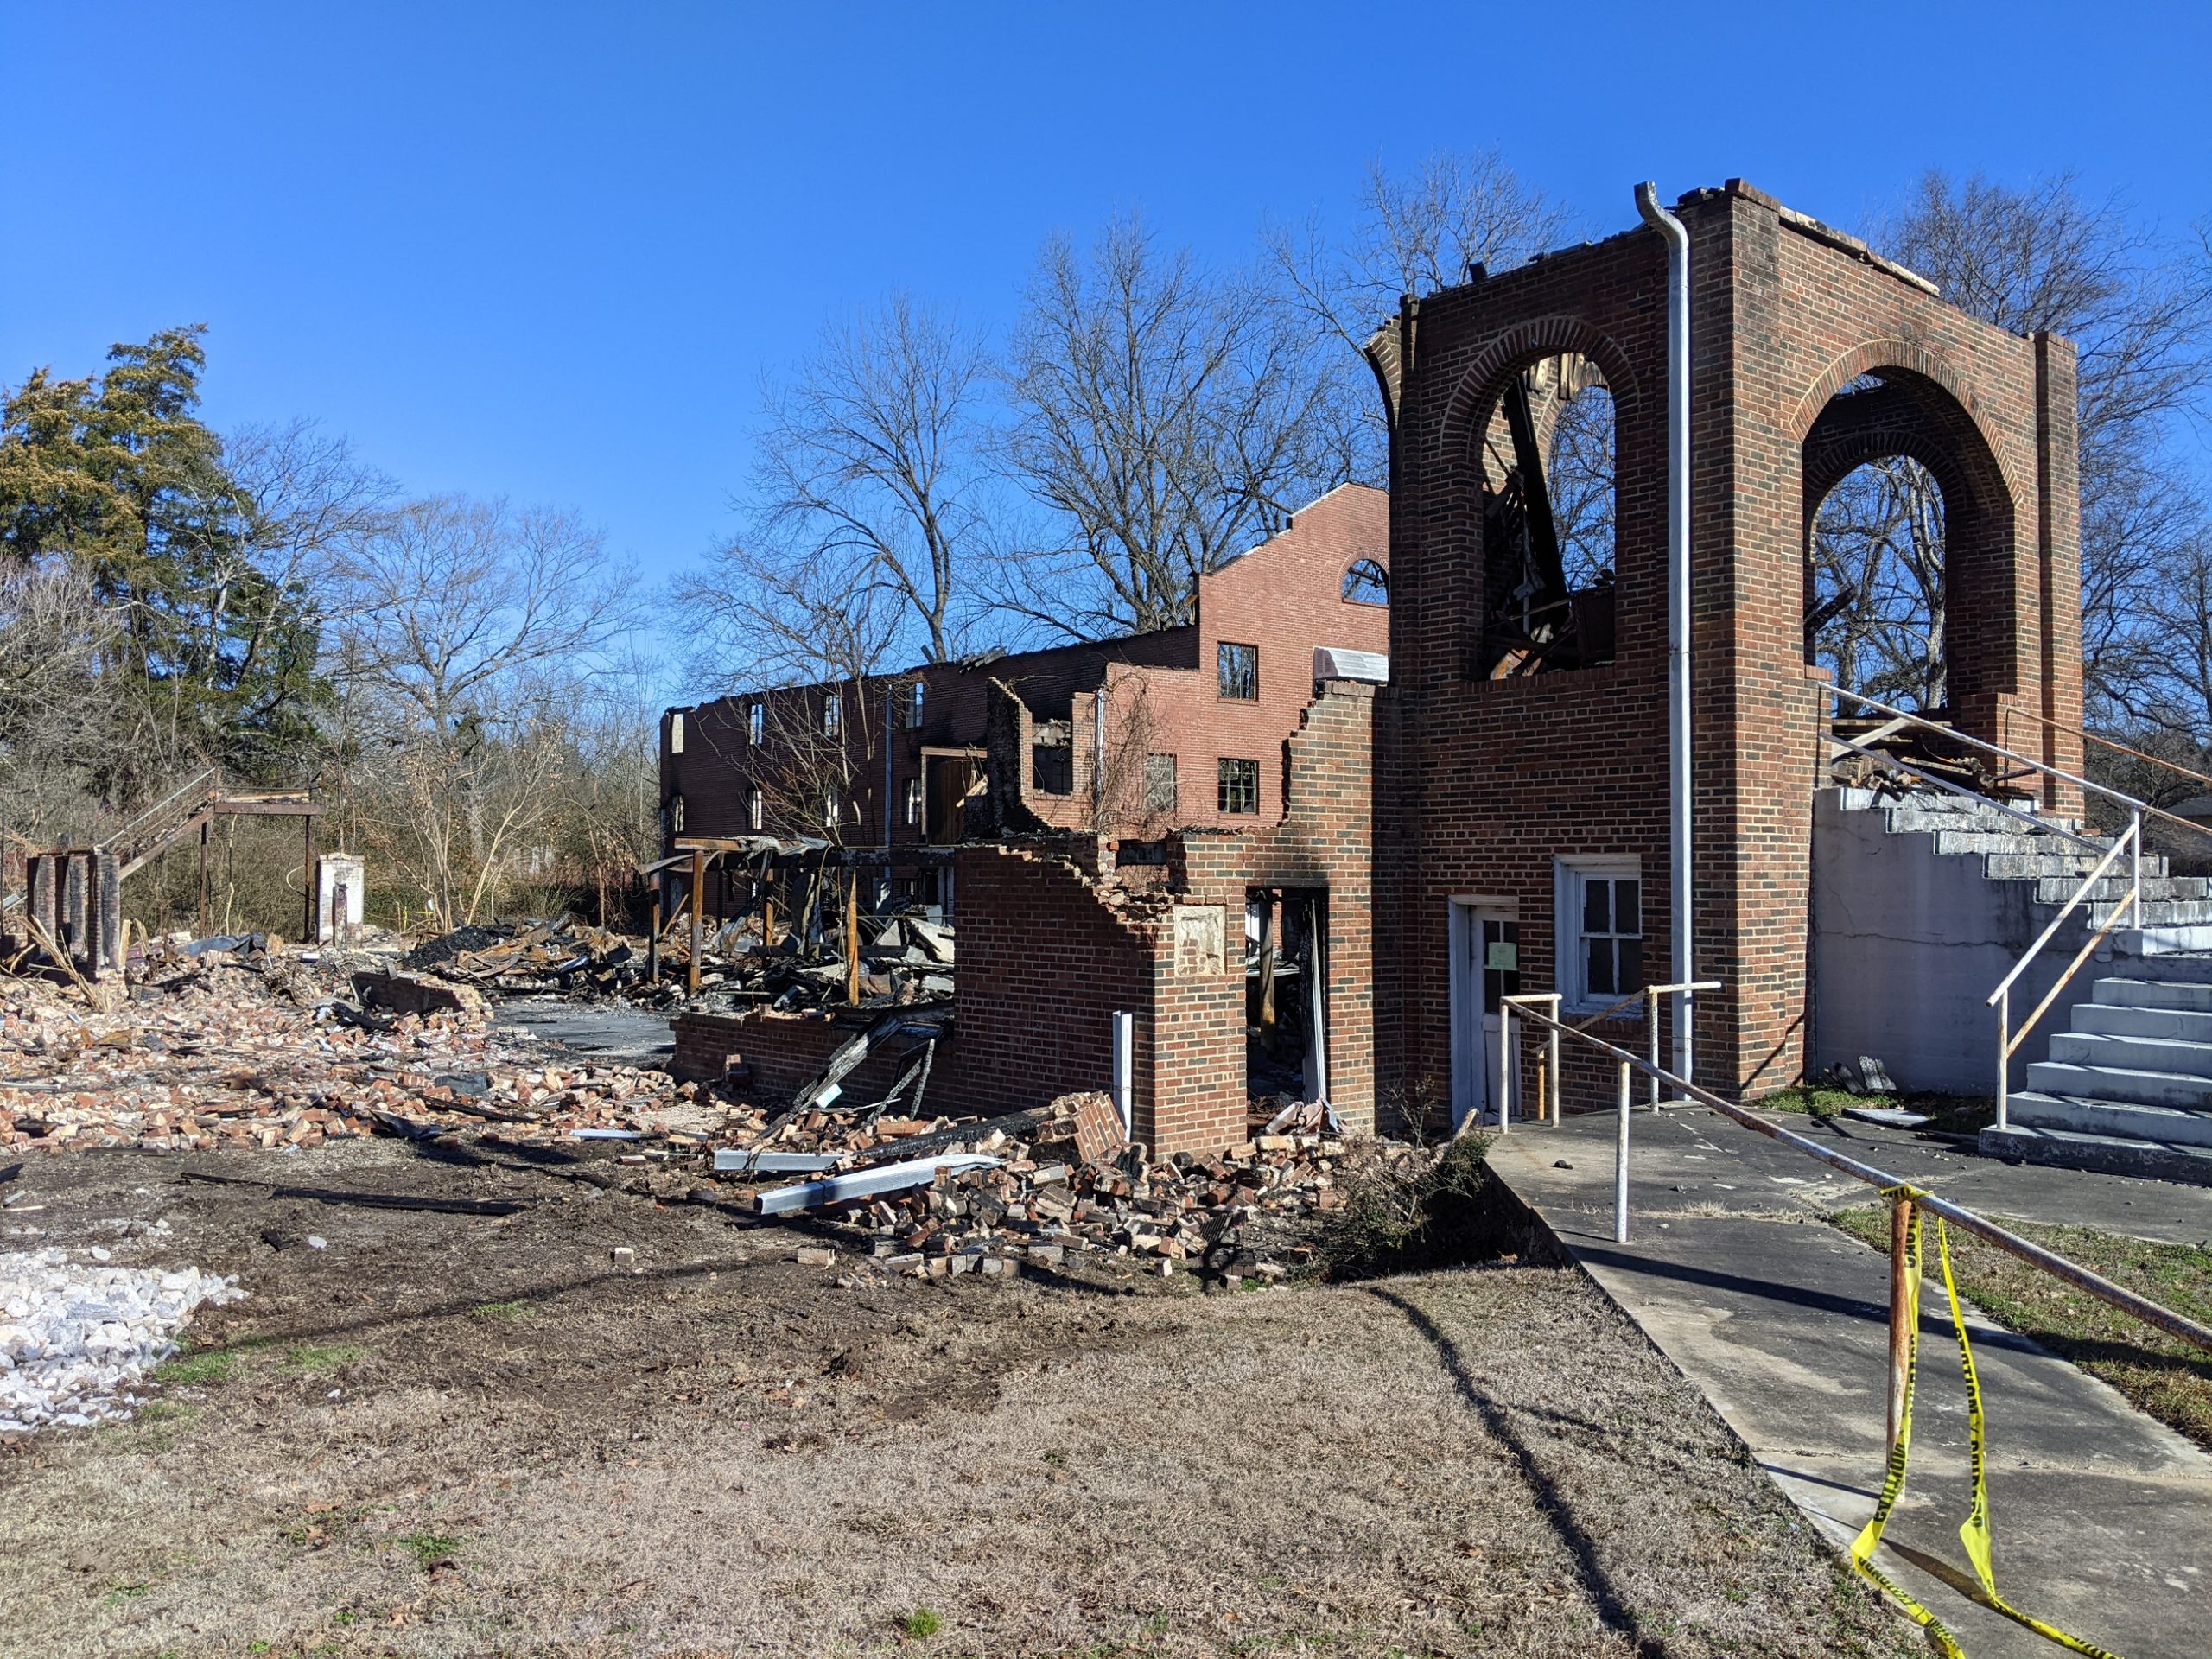 Leeds Council declares church destroyed by fire a public nuisance, gives $500K to BOE